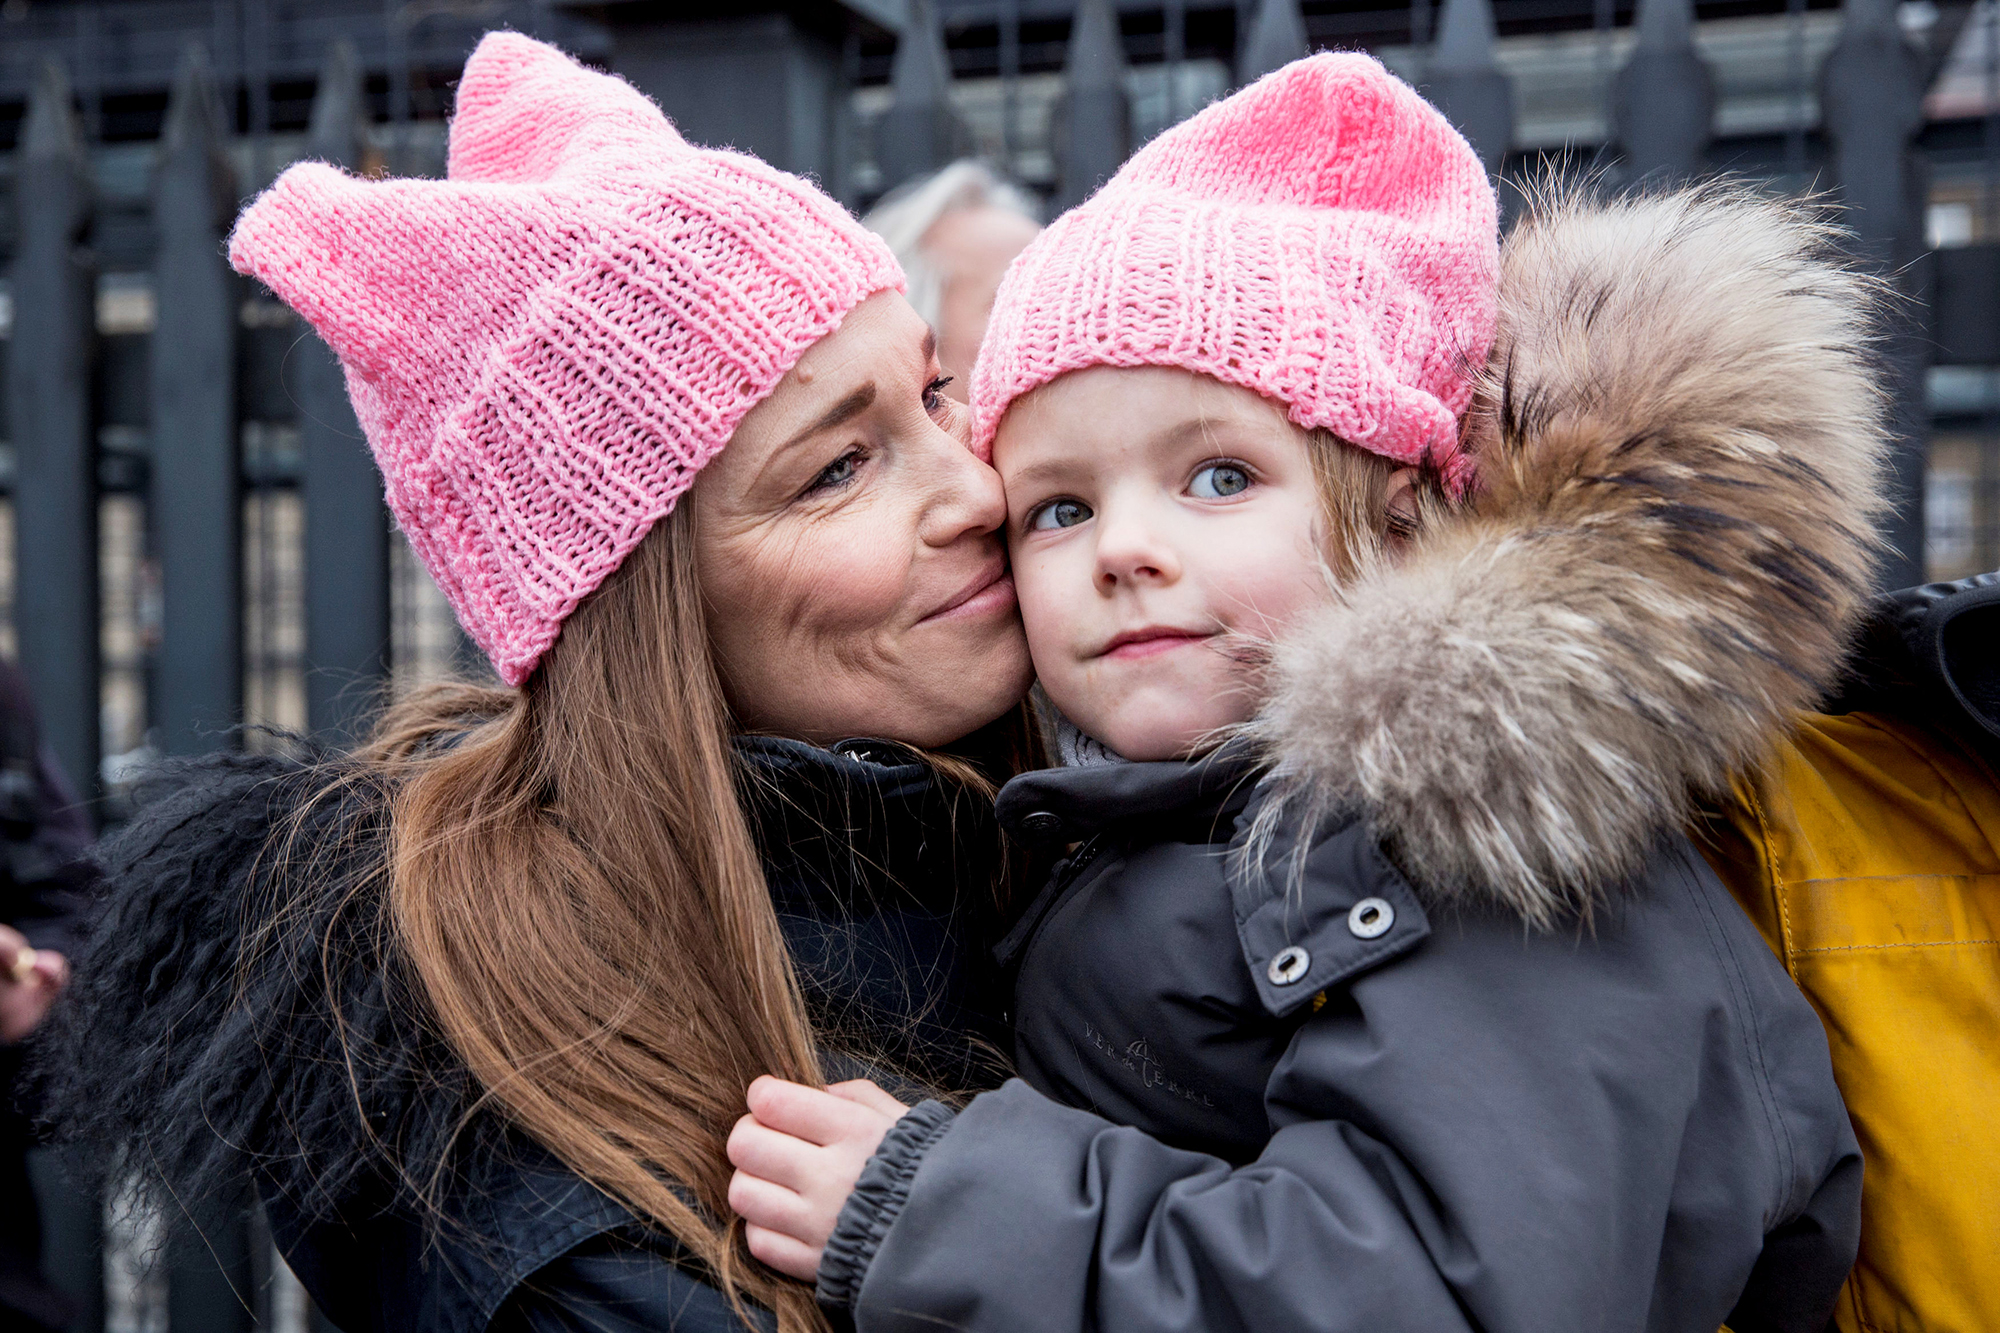 Women attend a march to commemorate International Women's Day in central Copenhagen, Denmark March 8, 2017 Scanpix Denmark/Nikolai Linares via REUTERS ATTENTION EDITORS - THIS IMAGE WAS PROVIDED BY A THIRD PARTY. FOR EDITORIAL USE ONLY. DENMARK OUT. NO COMMERCIAL OR EDITORIAL SALES IN DENMARK.